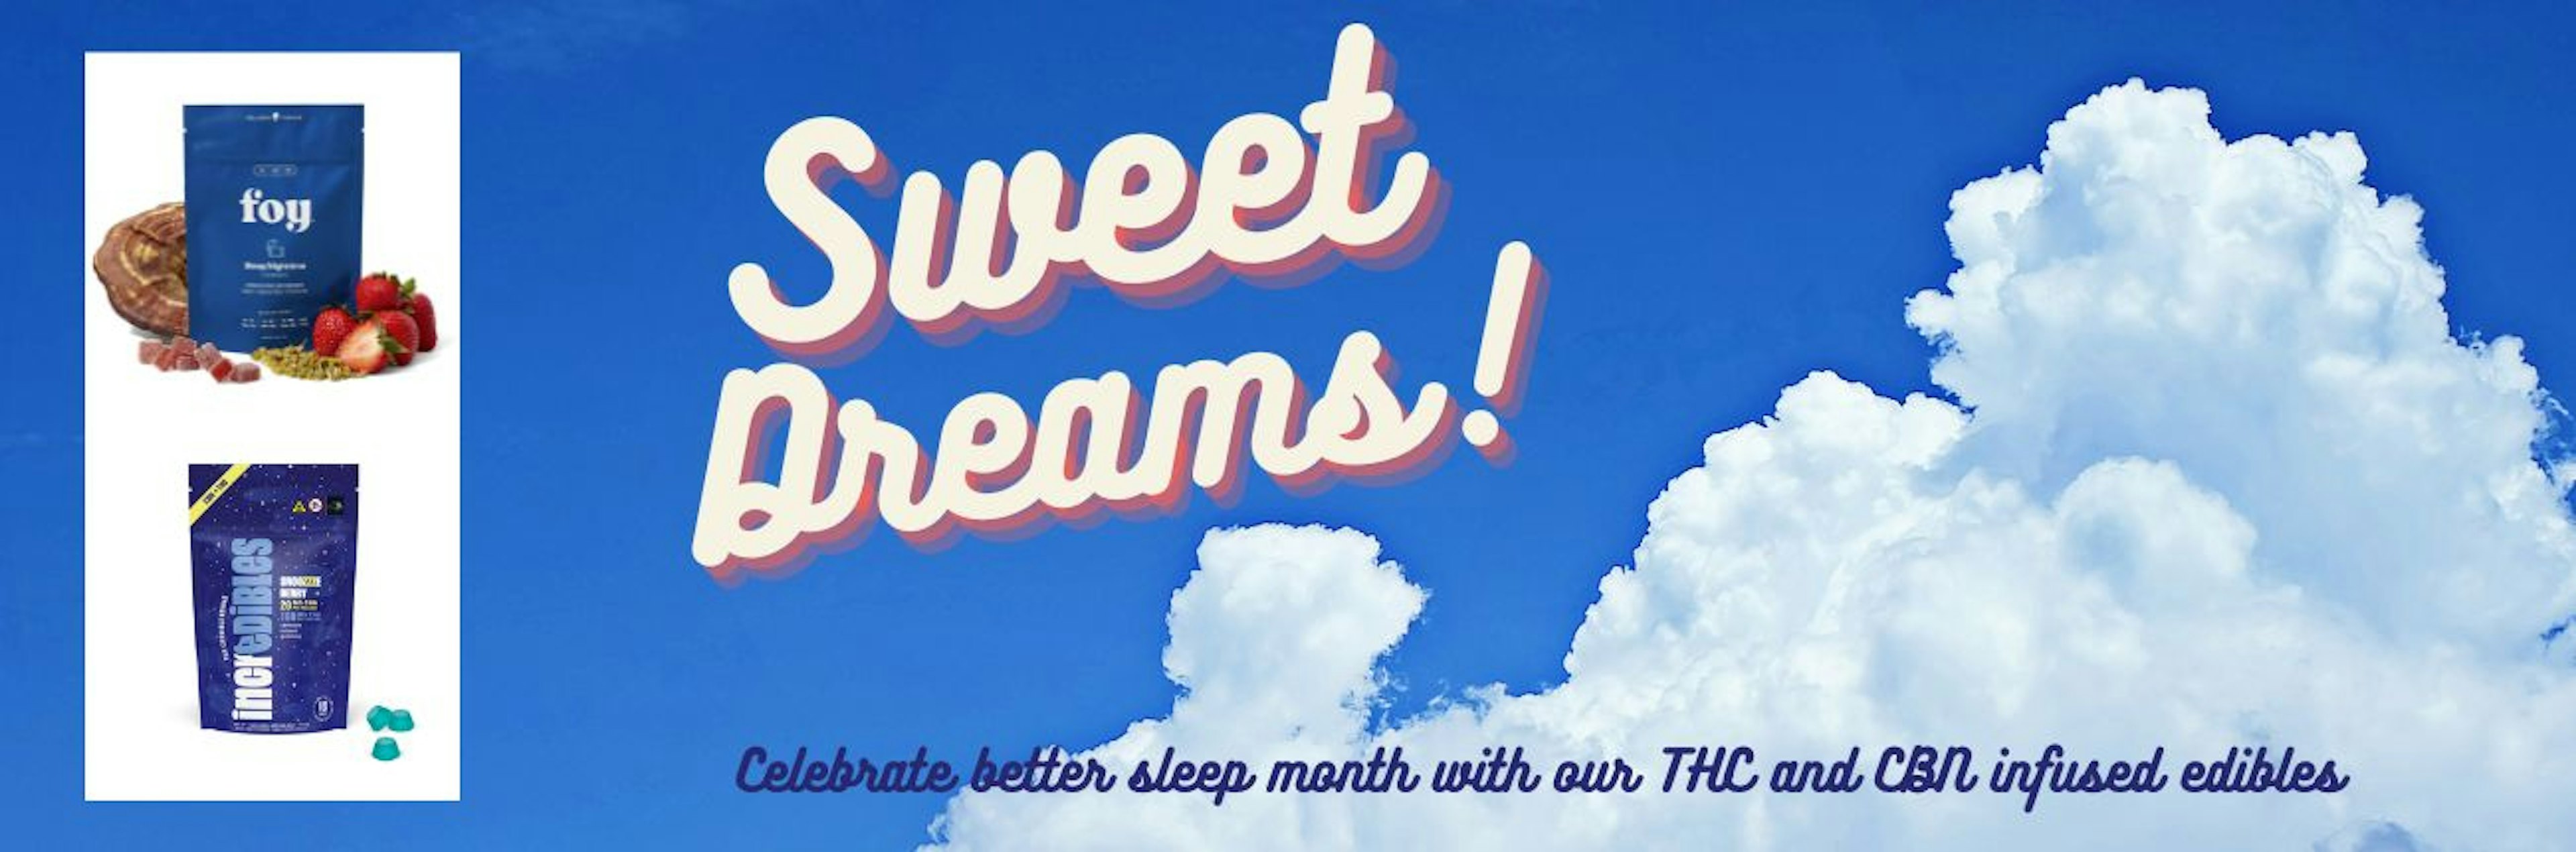 May is Better Sleep Month